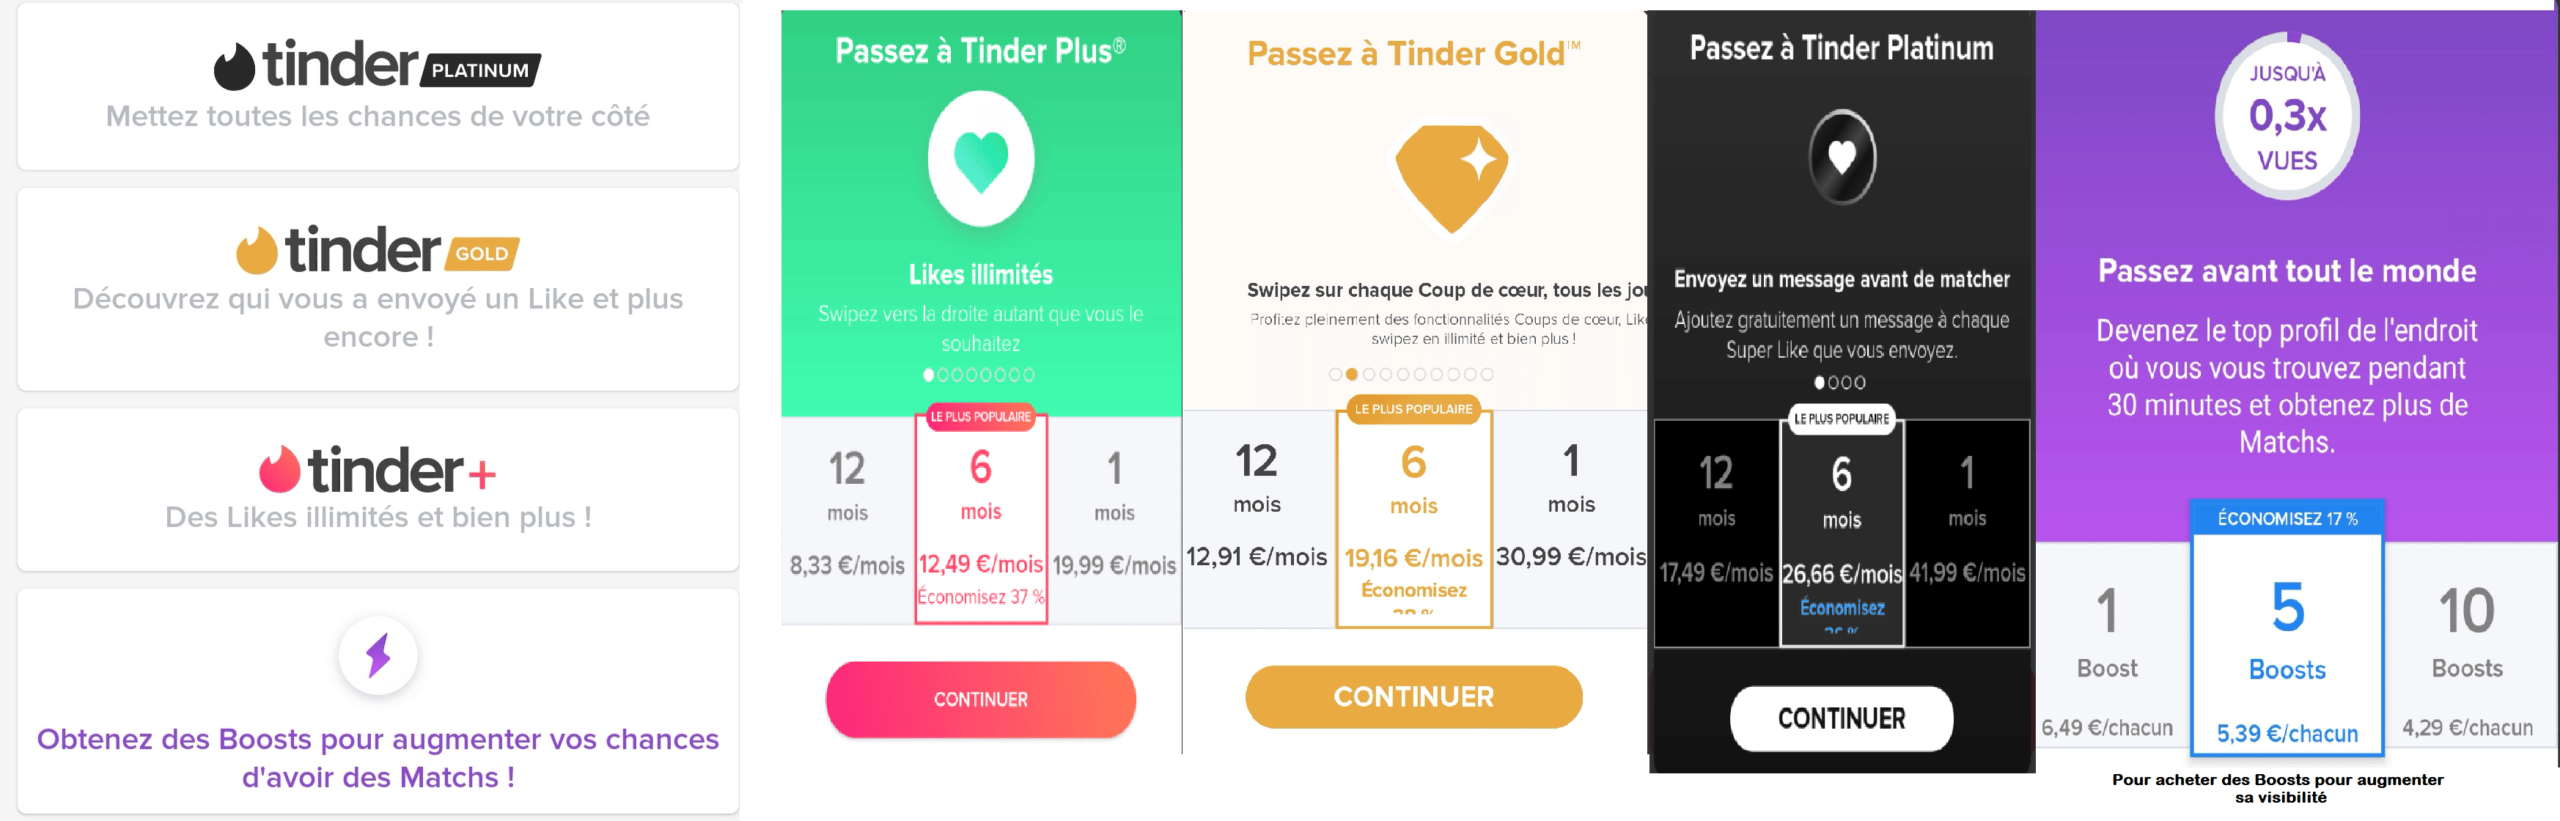 Tinder gold prix How much